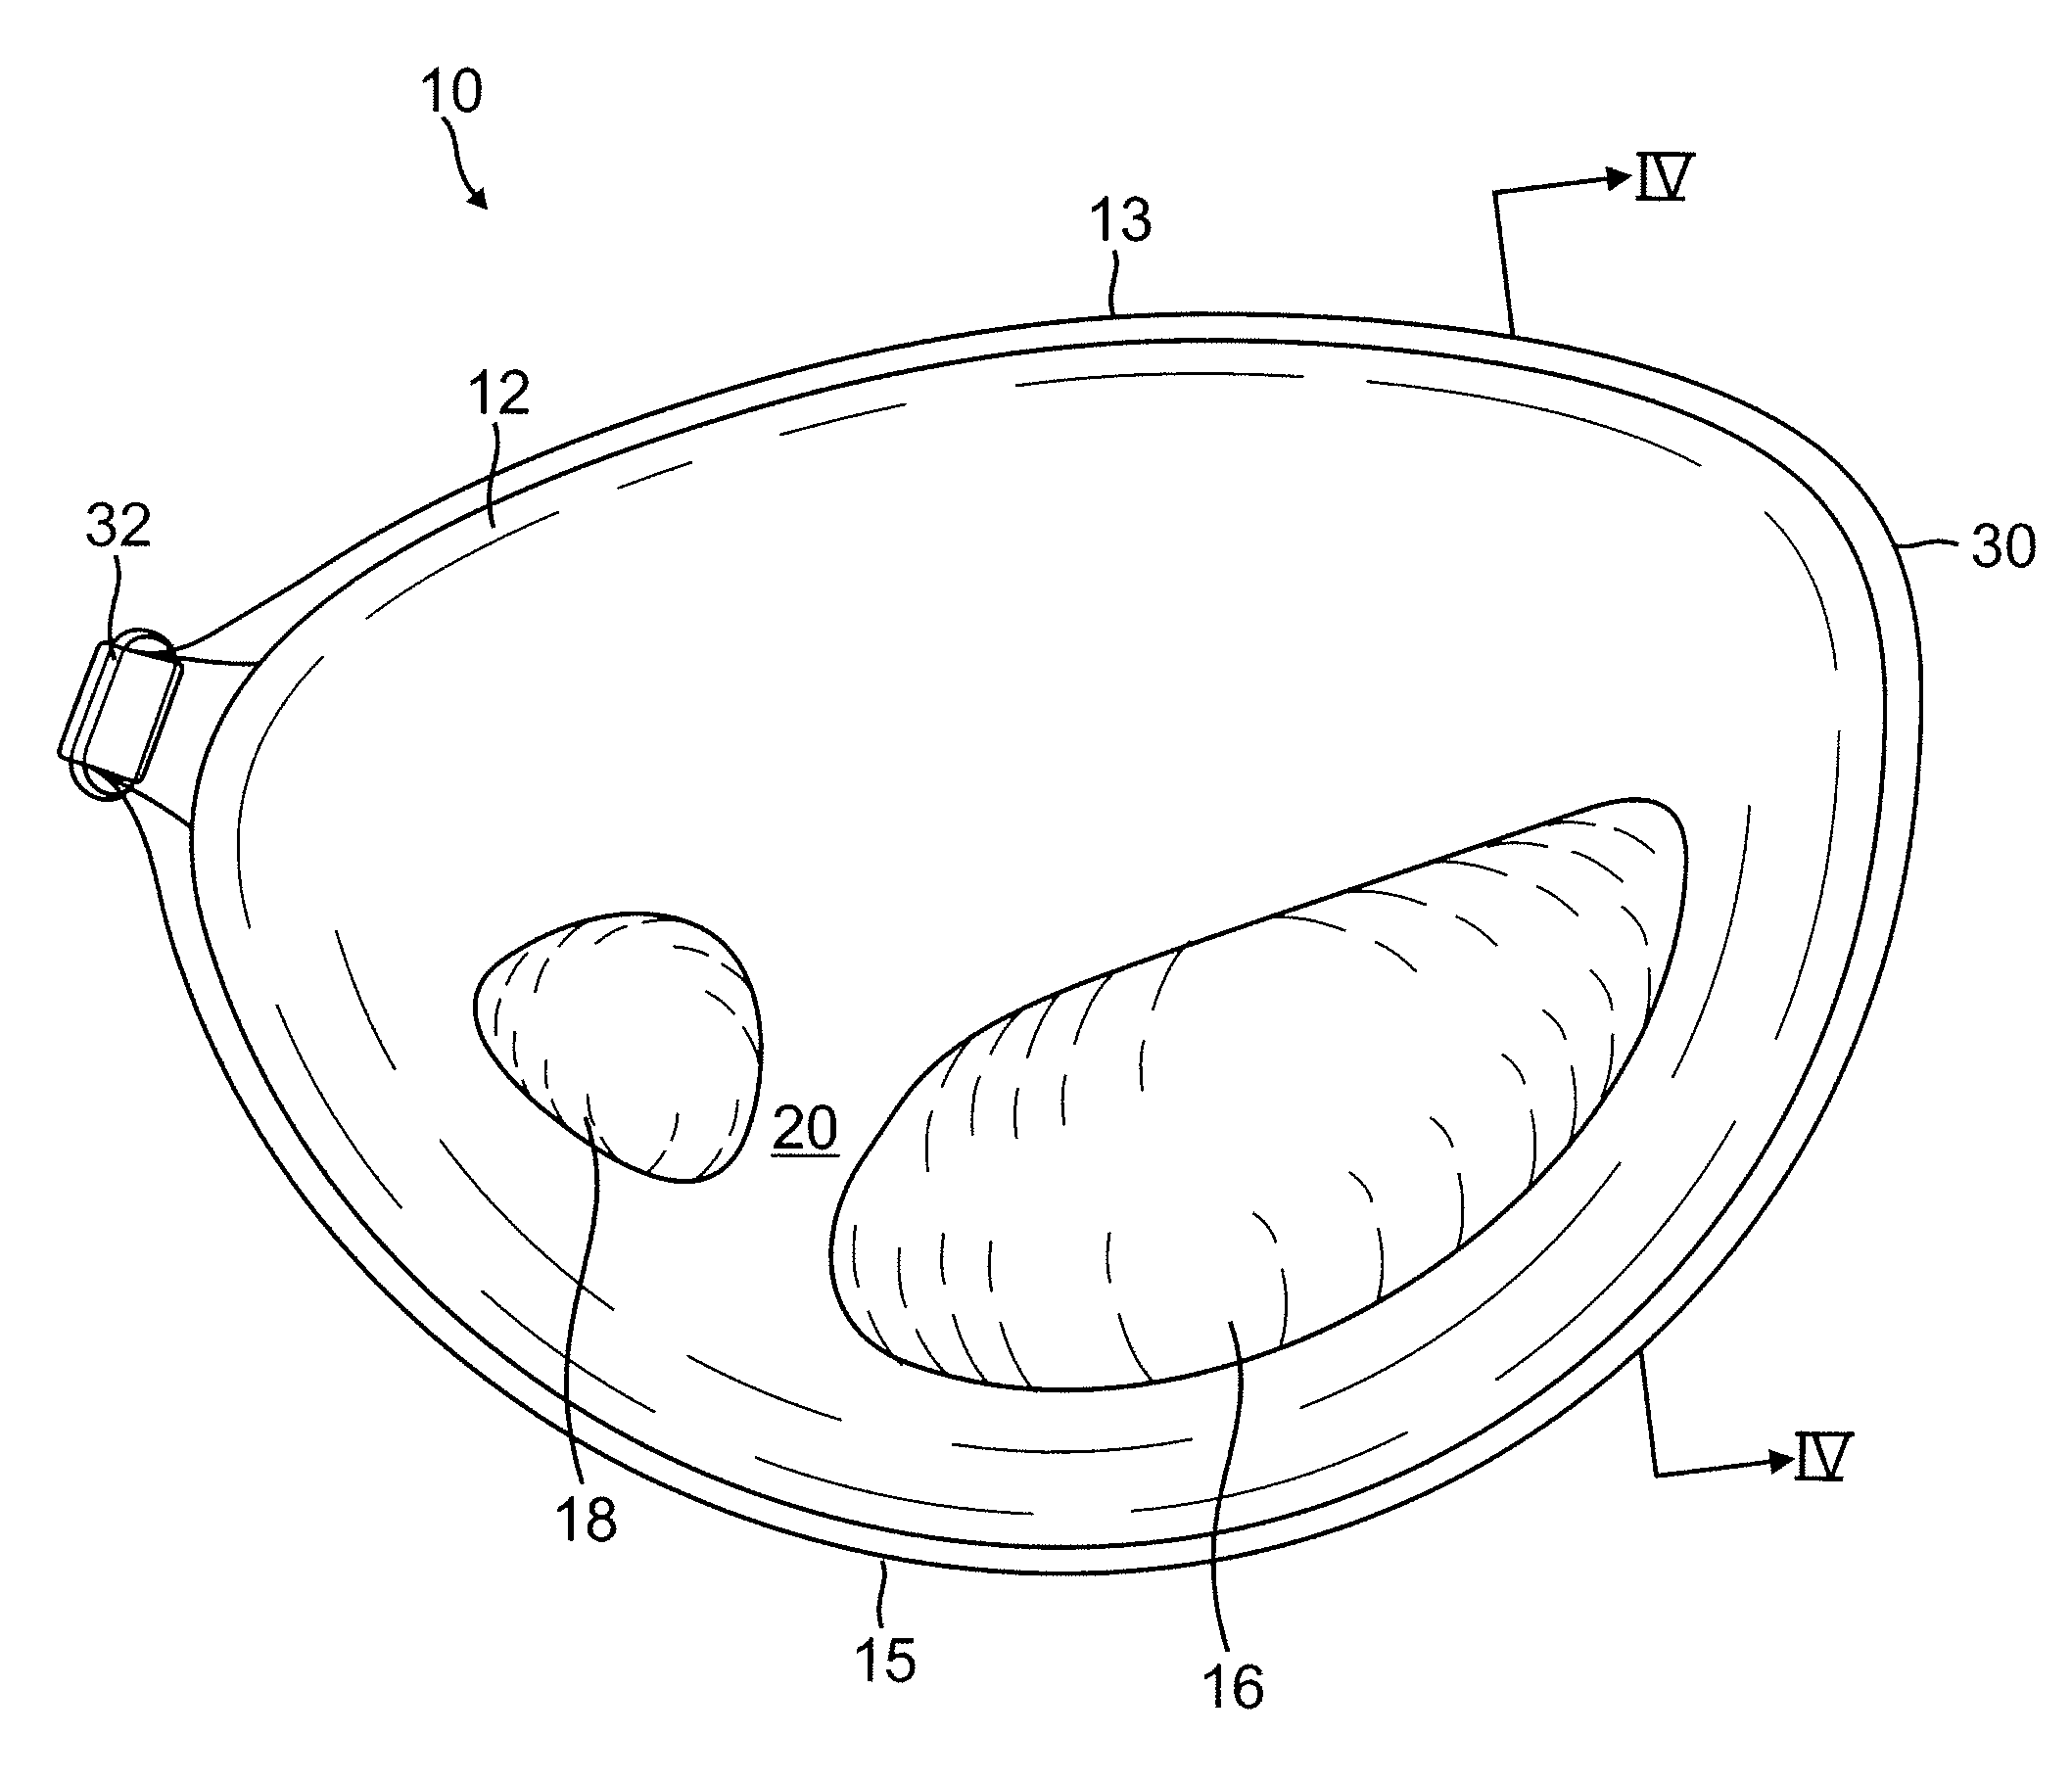 Attachable breast form enhancement system